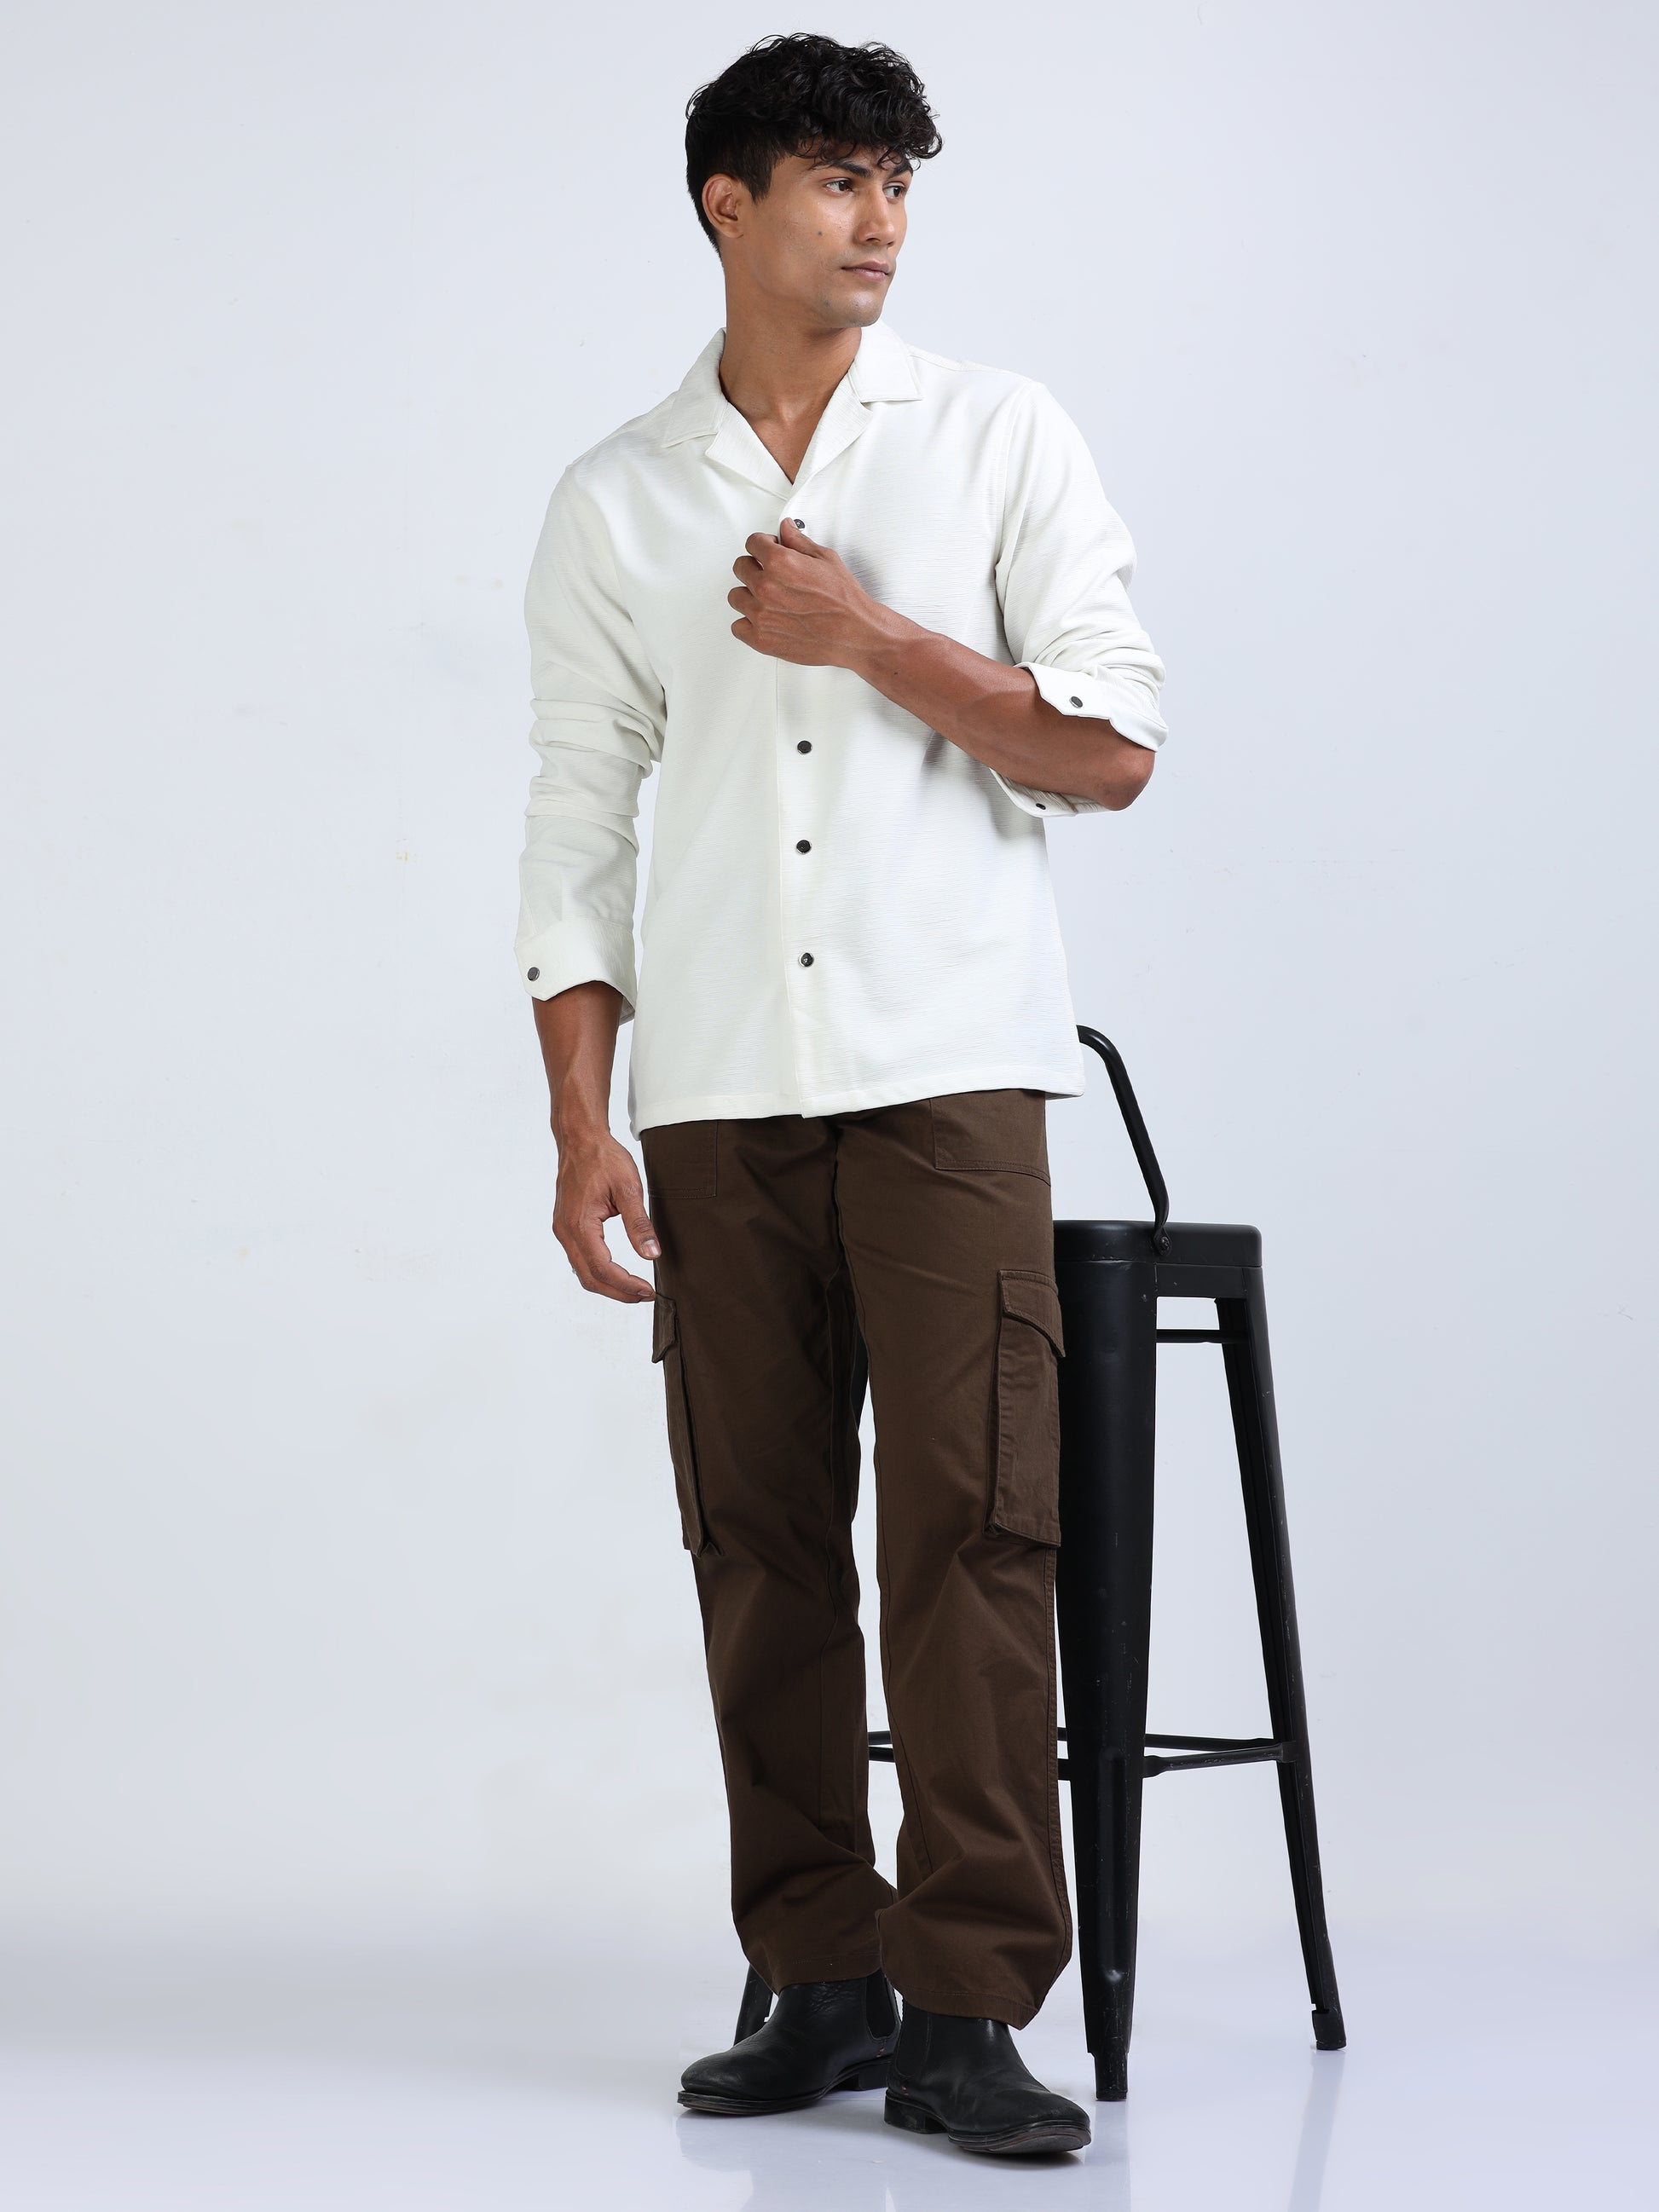 White Kintted Texture Lycra Shirt for Men 